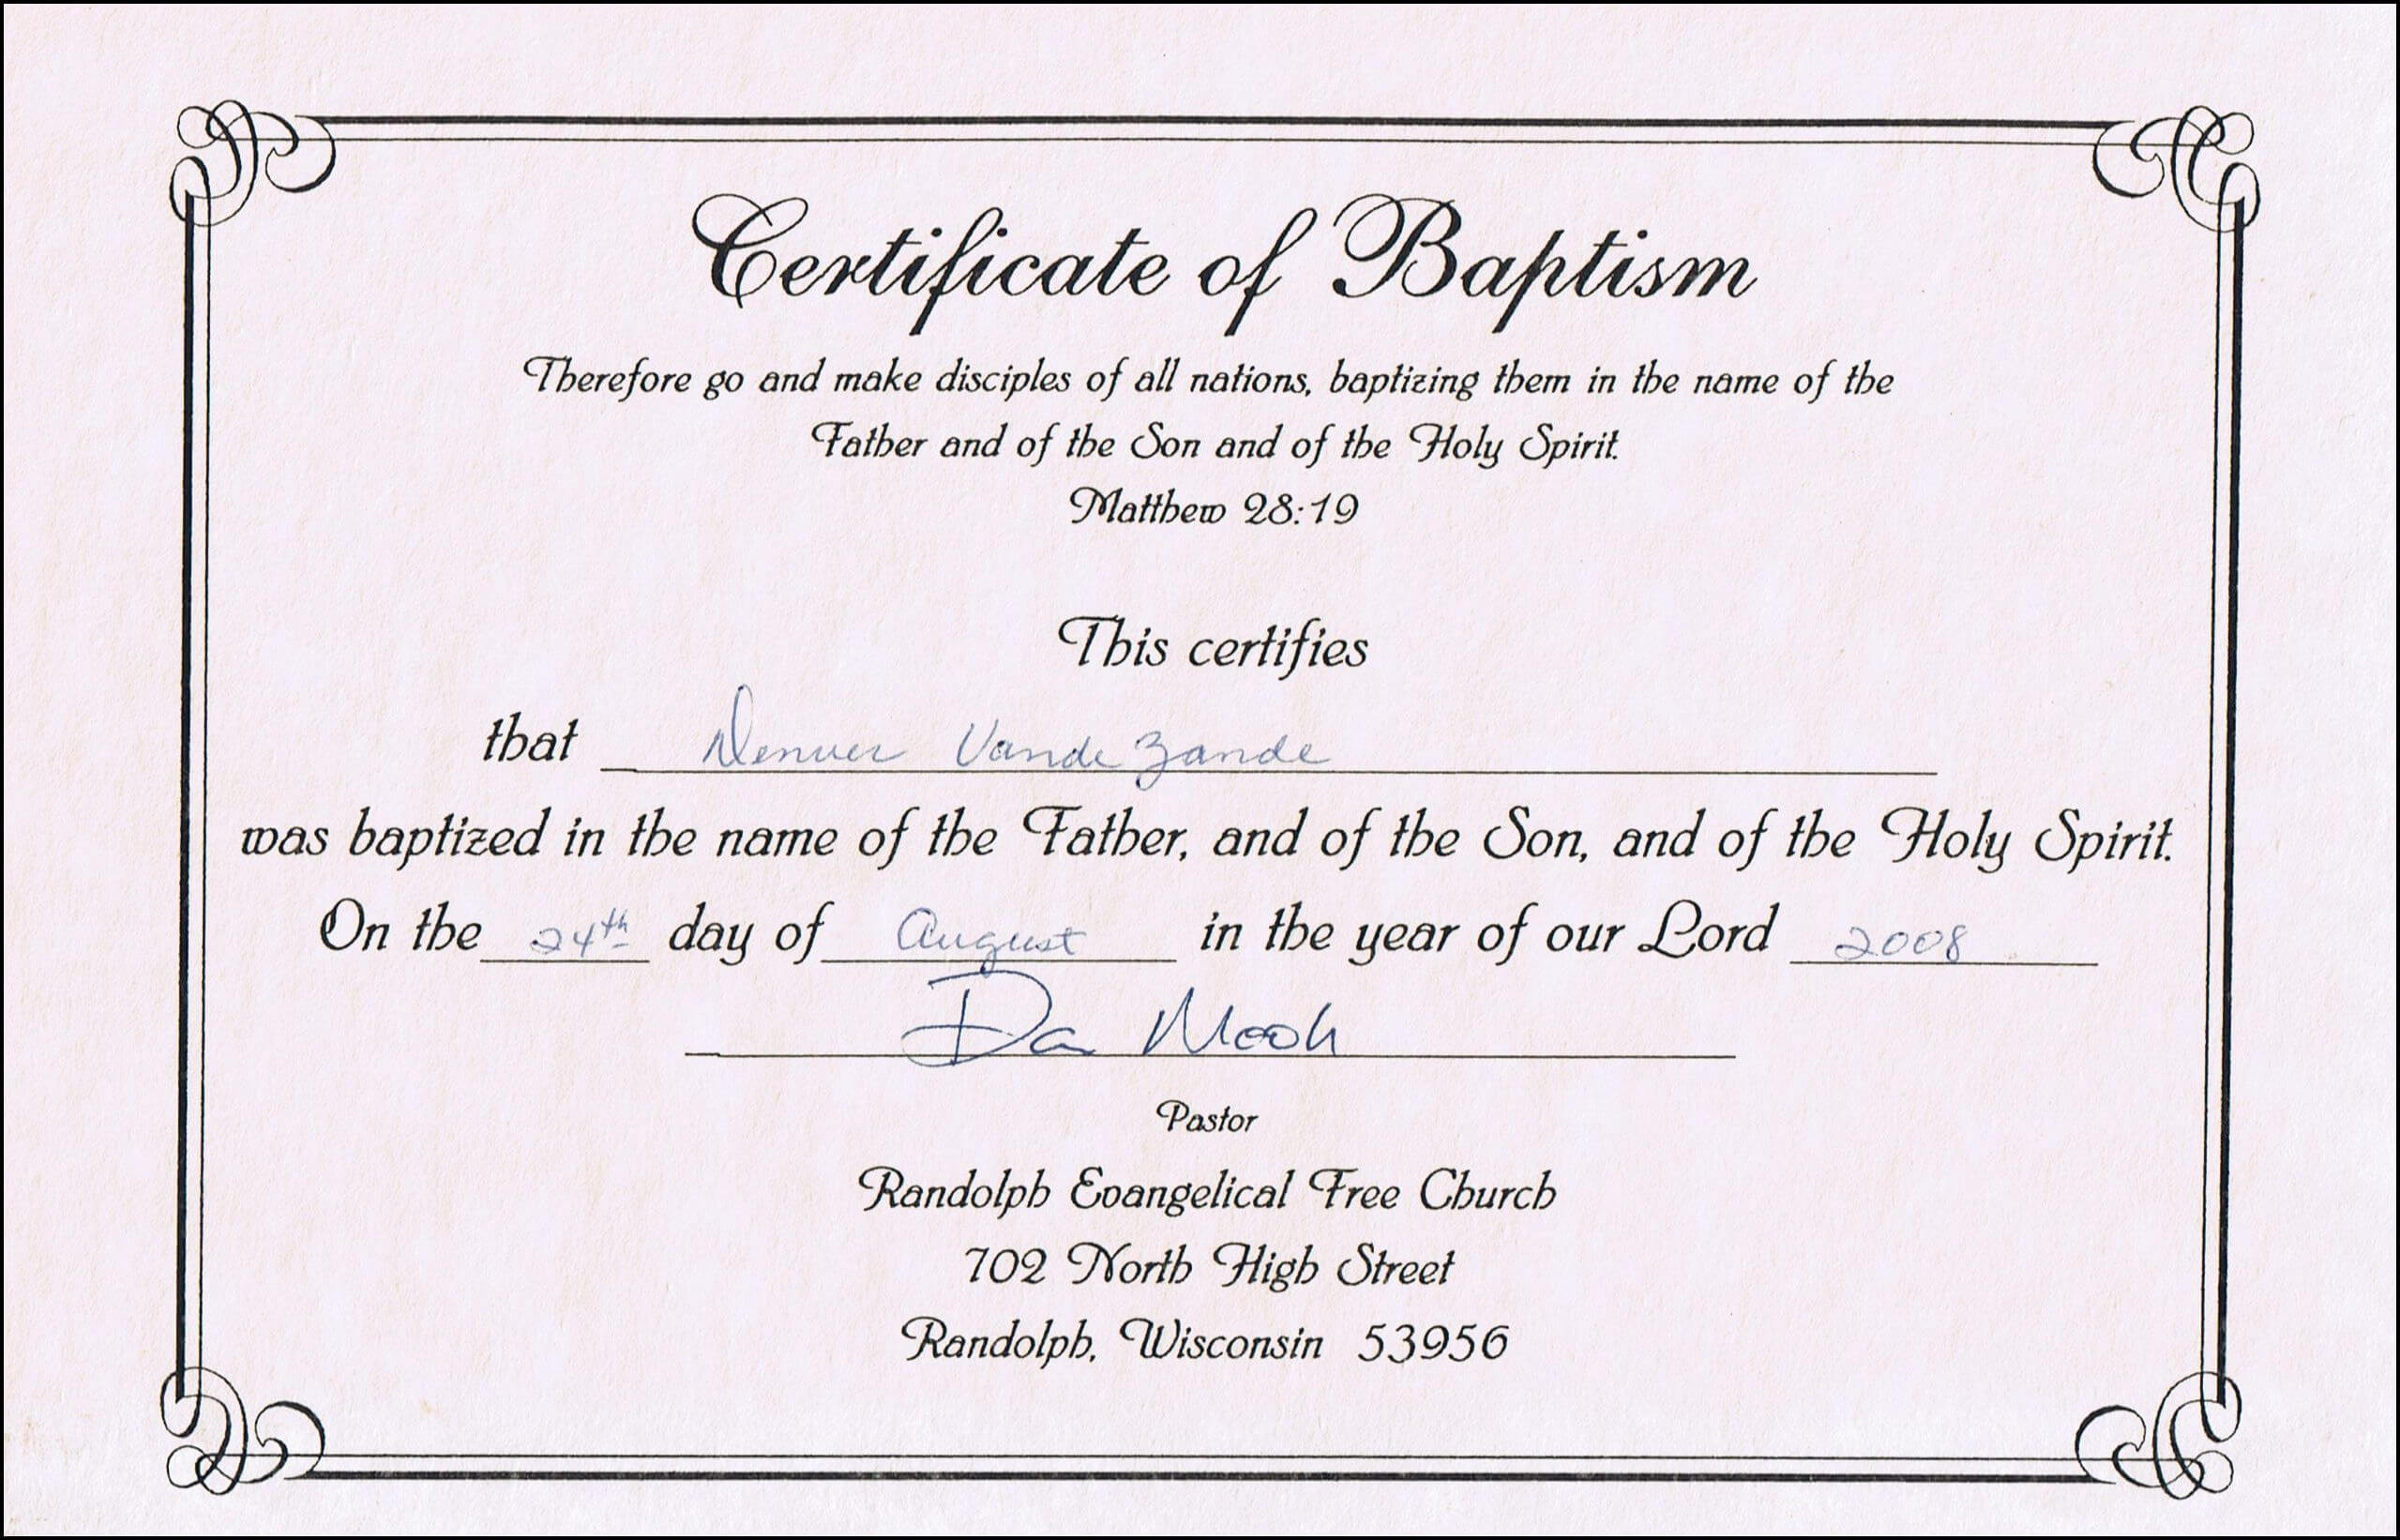 Baptism Certificate Templates For Word | Aspects Of Beauty Pertaining To Christian Baptism Certificate Template